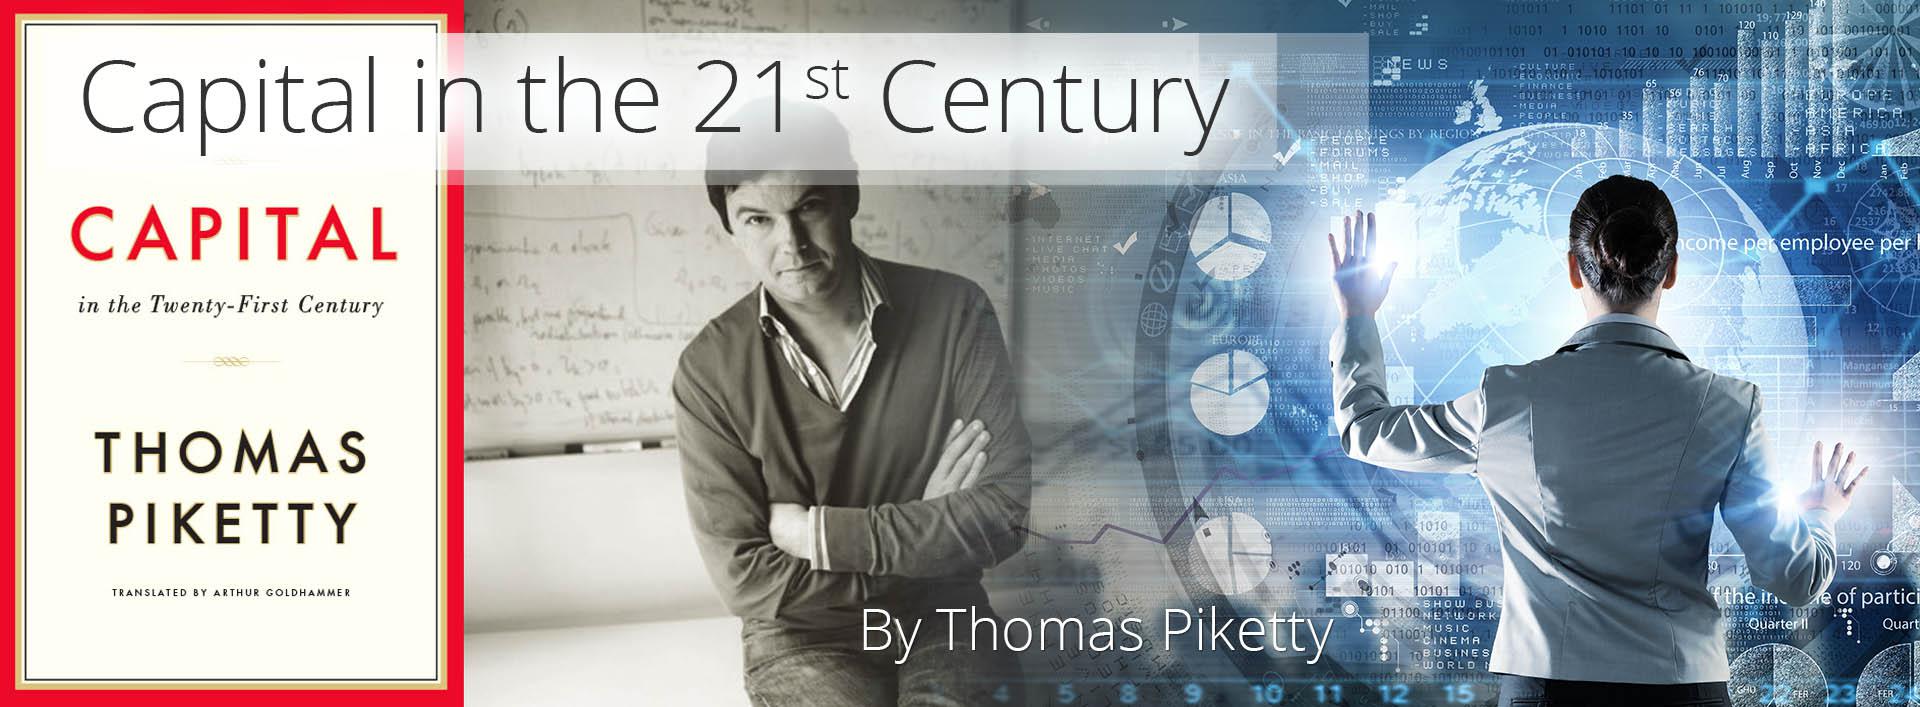 Capital in the 21st Century - by Thomas Piketty